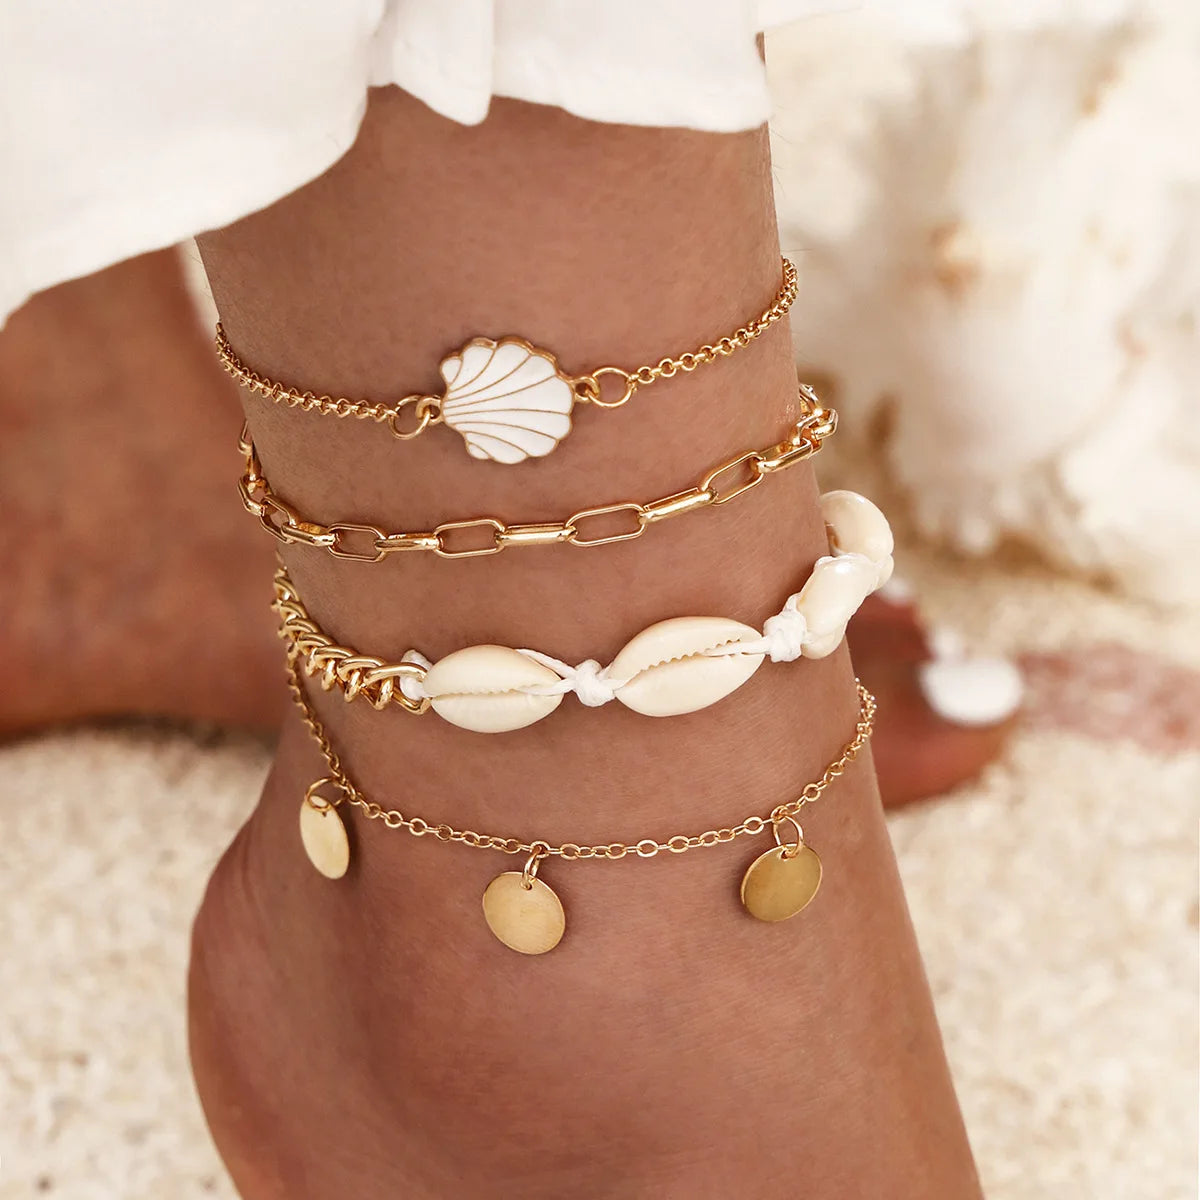 Bohemia Shell Chain Anklet Sets for Women Sequins Ankle Bracelet on Leg Foot Trendy Summer Beach Jewelry Gift